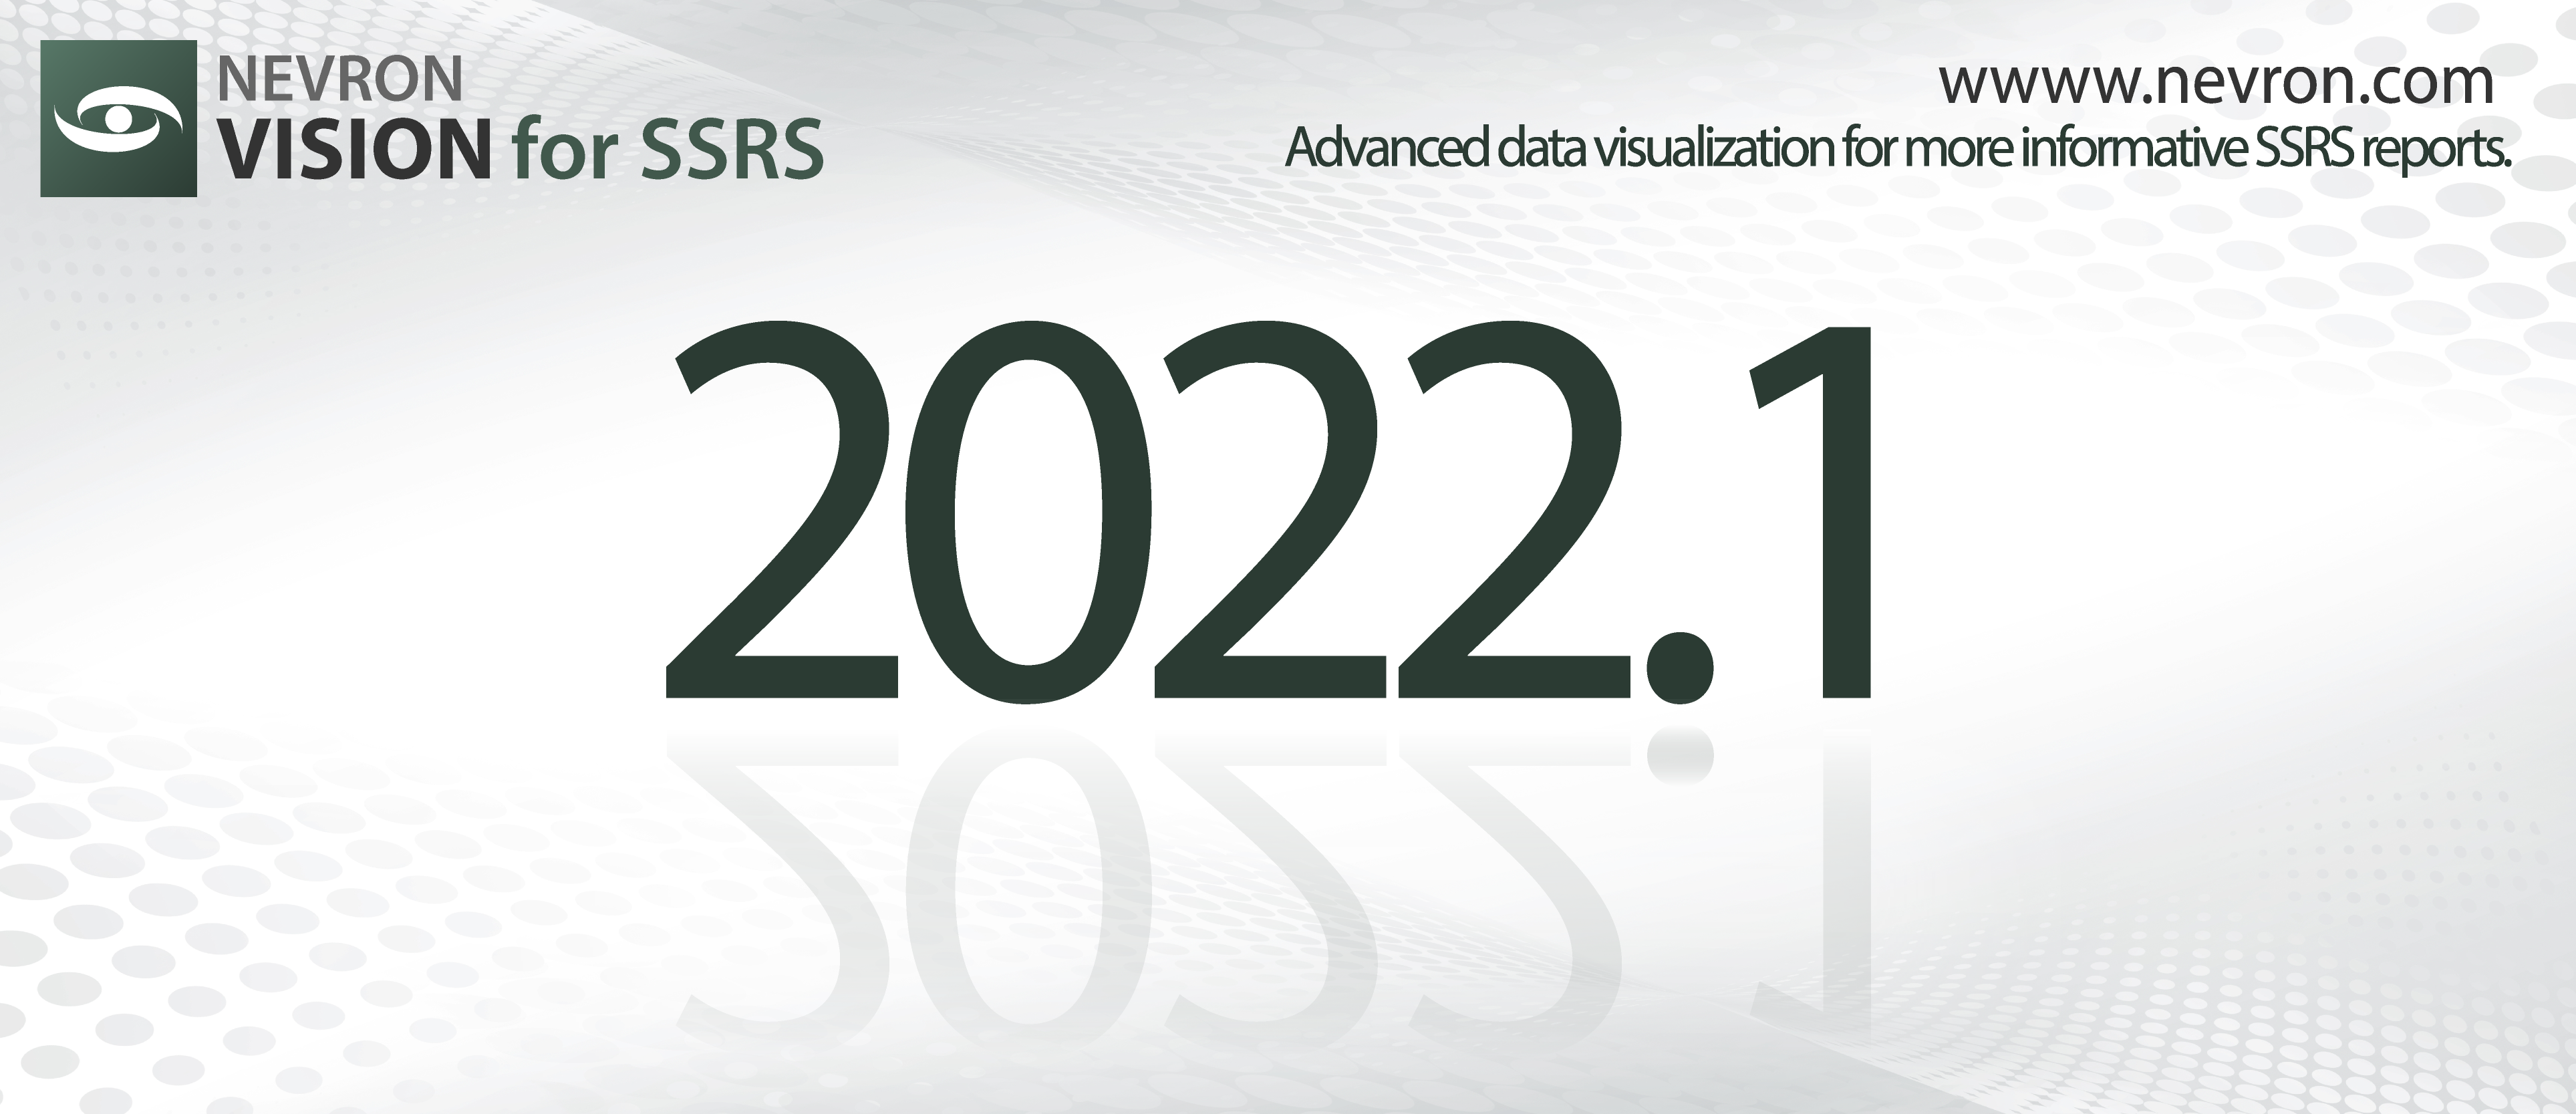 SSRS Release 2022